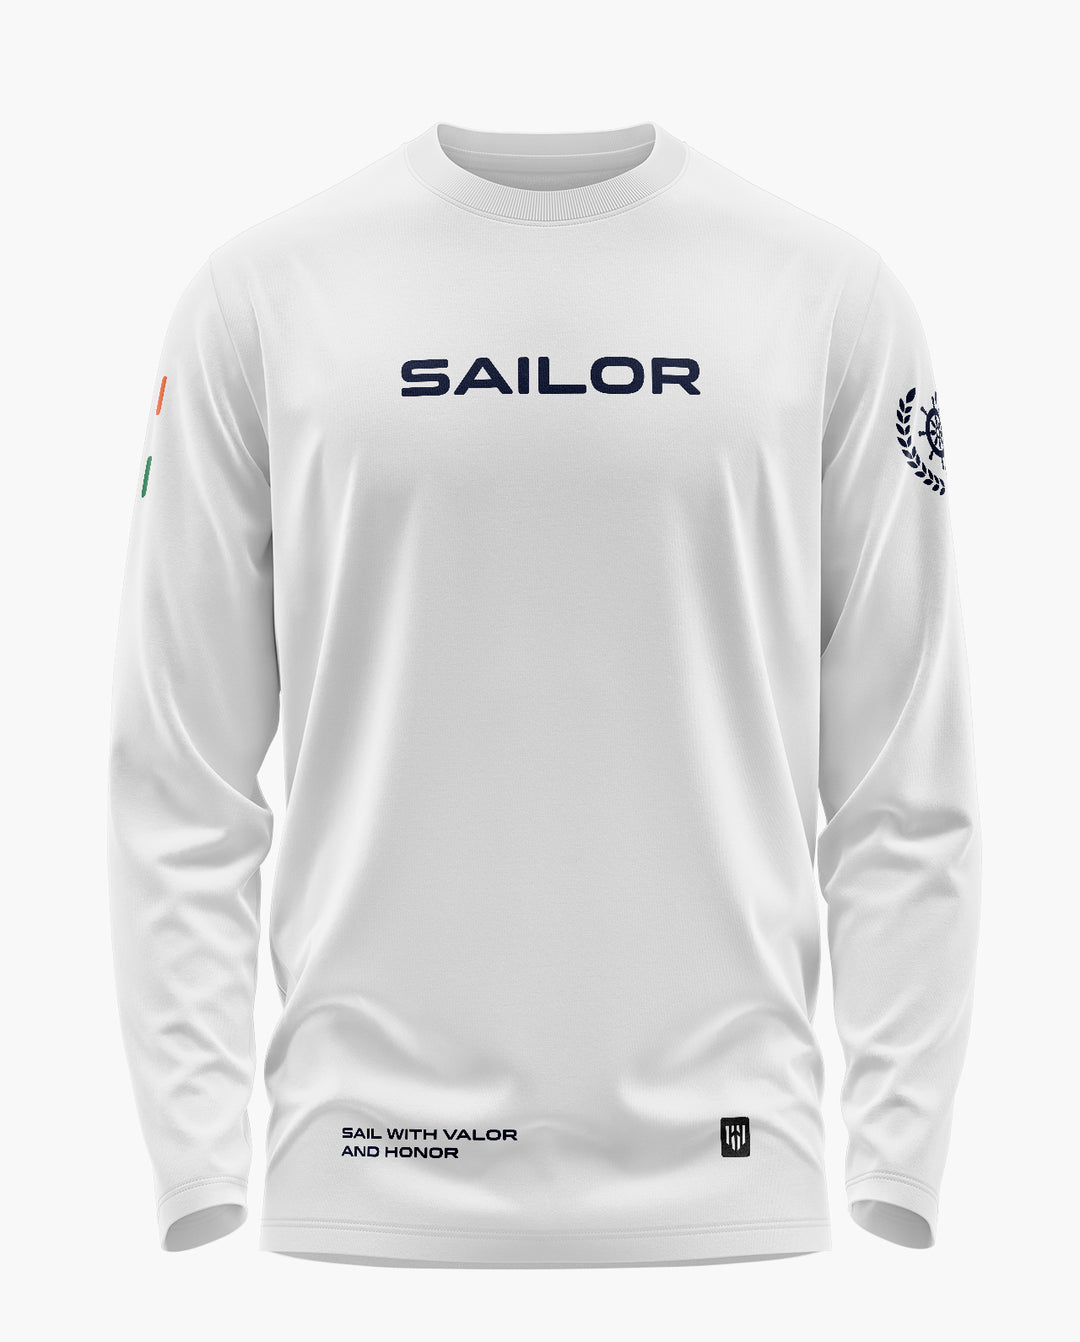 A Sailor's Pride Full Sleeve T-Shirt